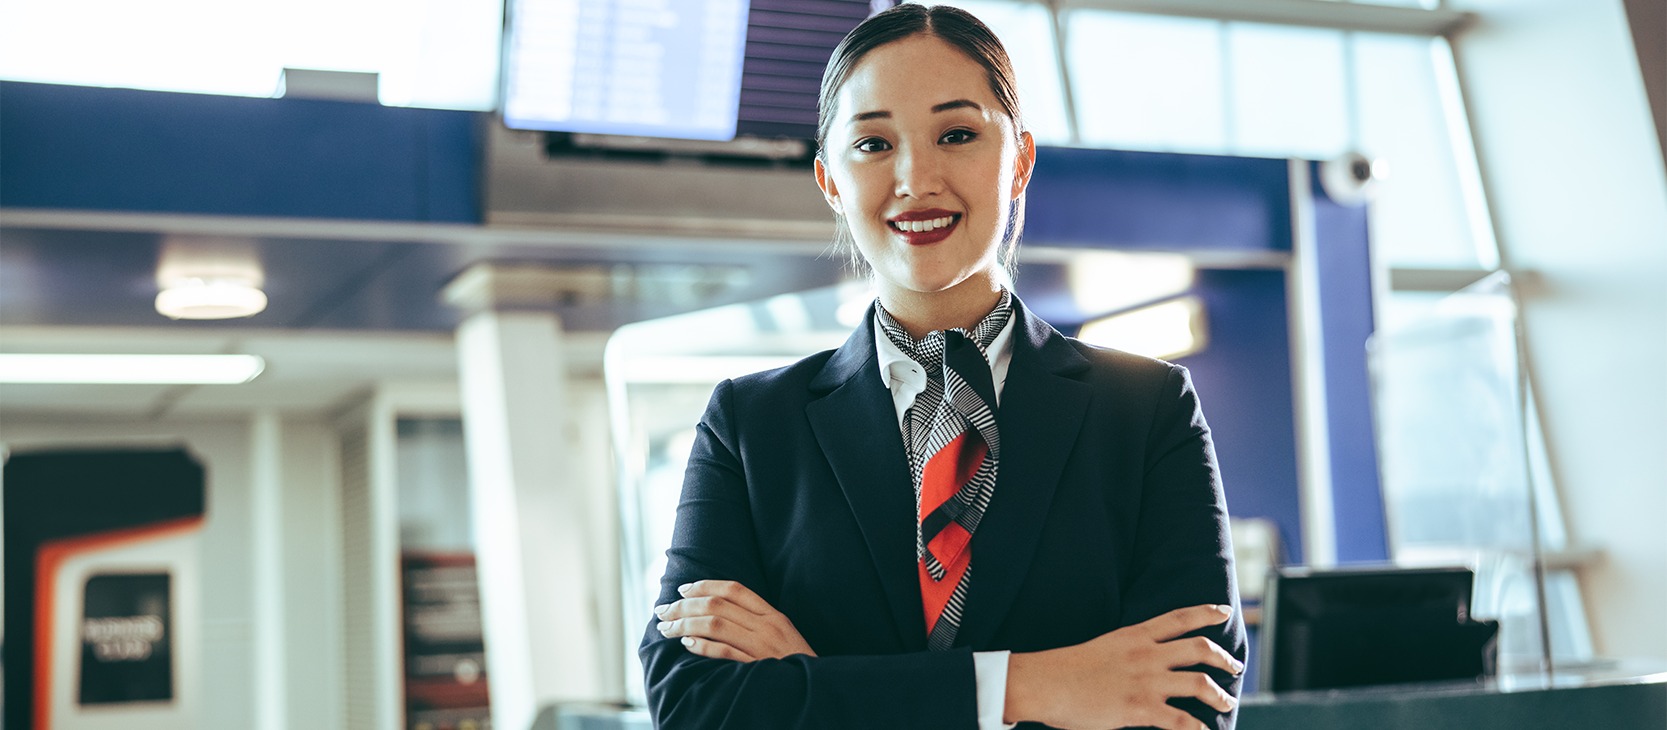 A airline employee smiling, looking at camera with her arms crossed